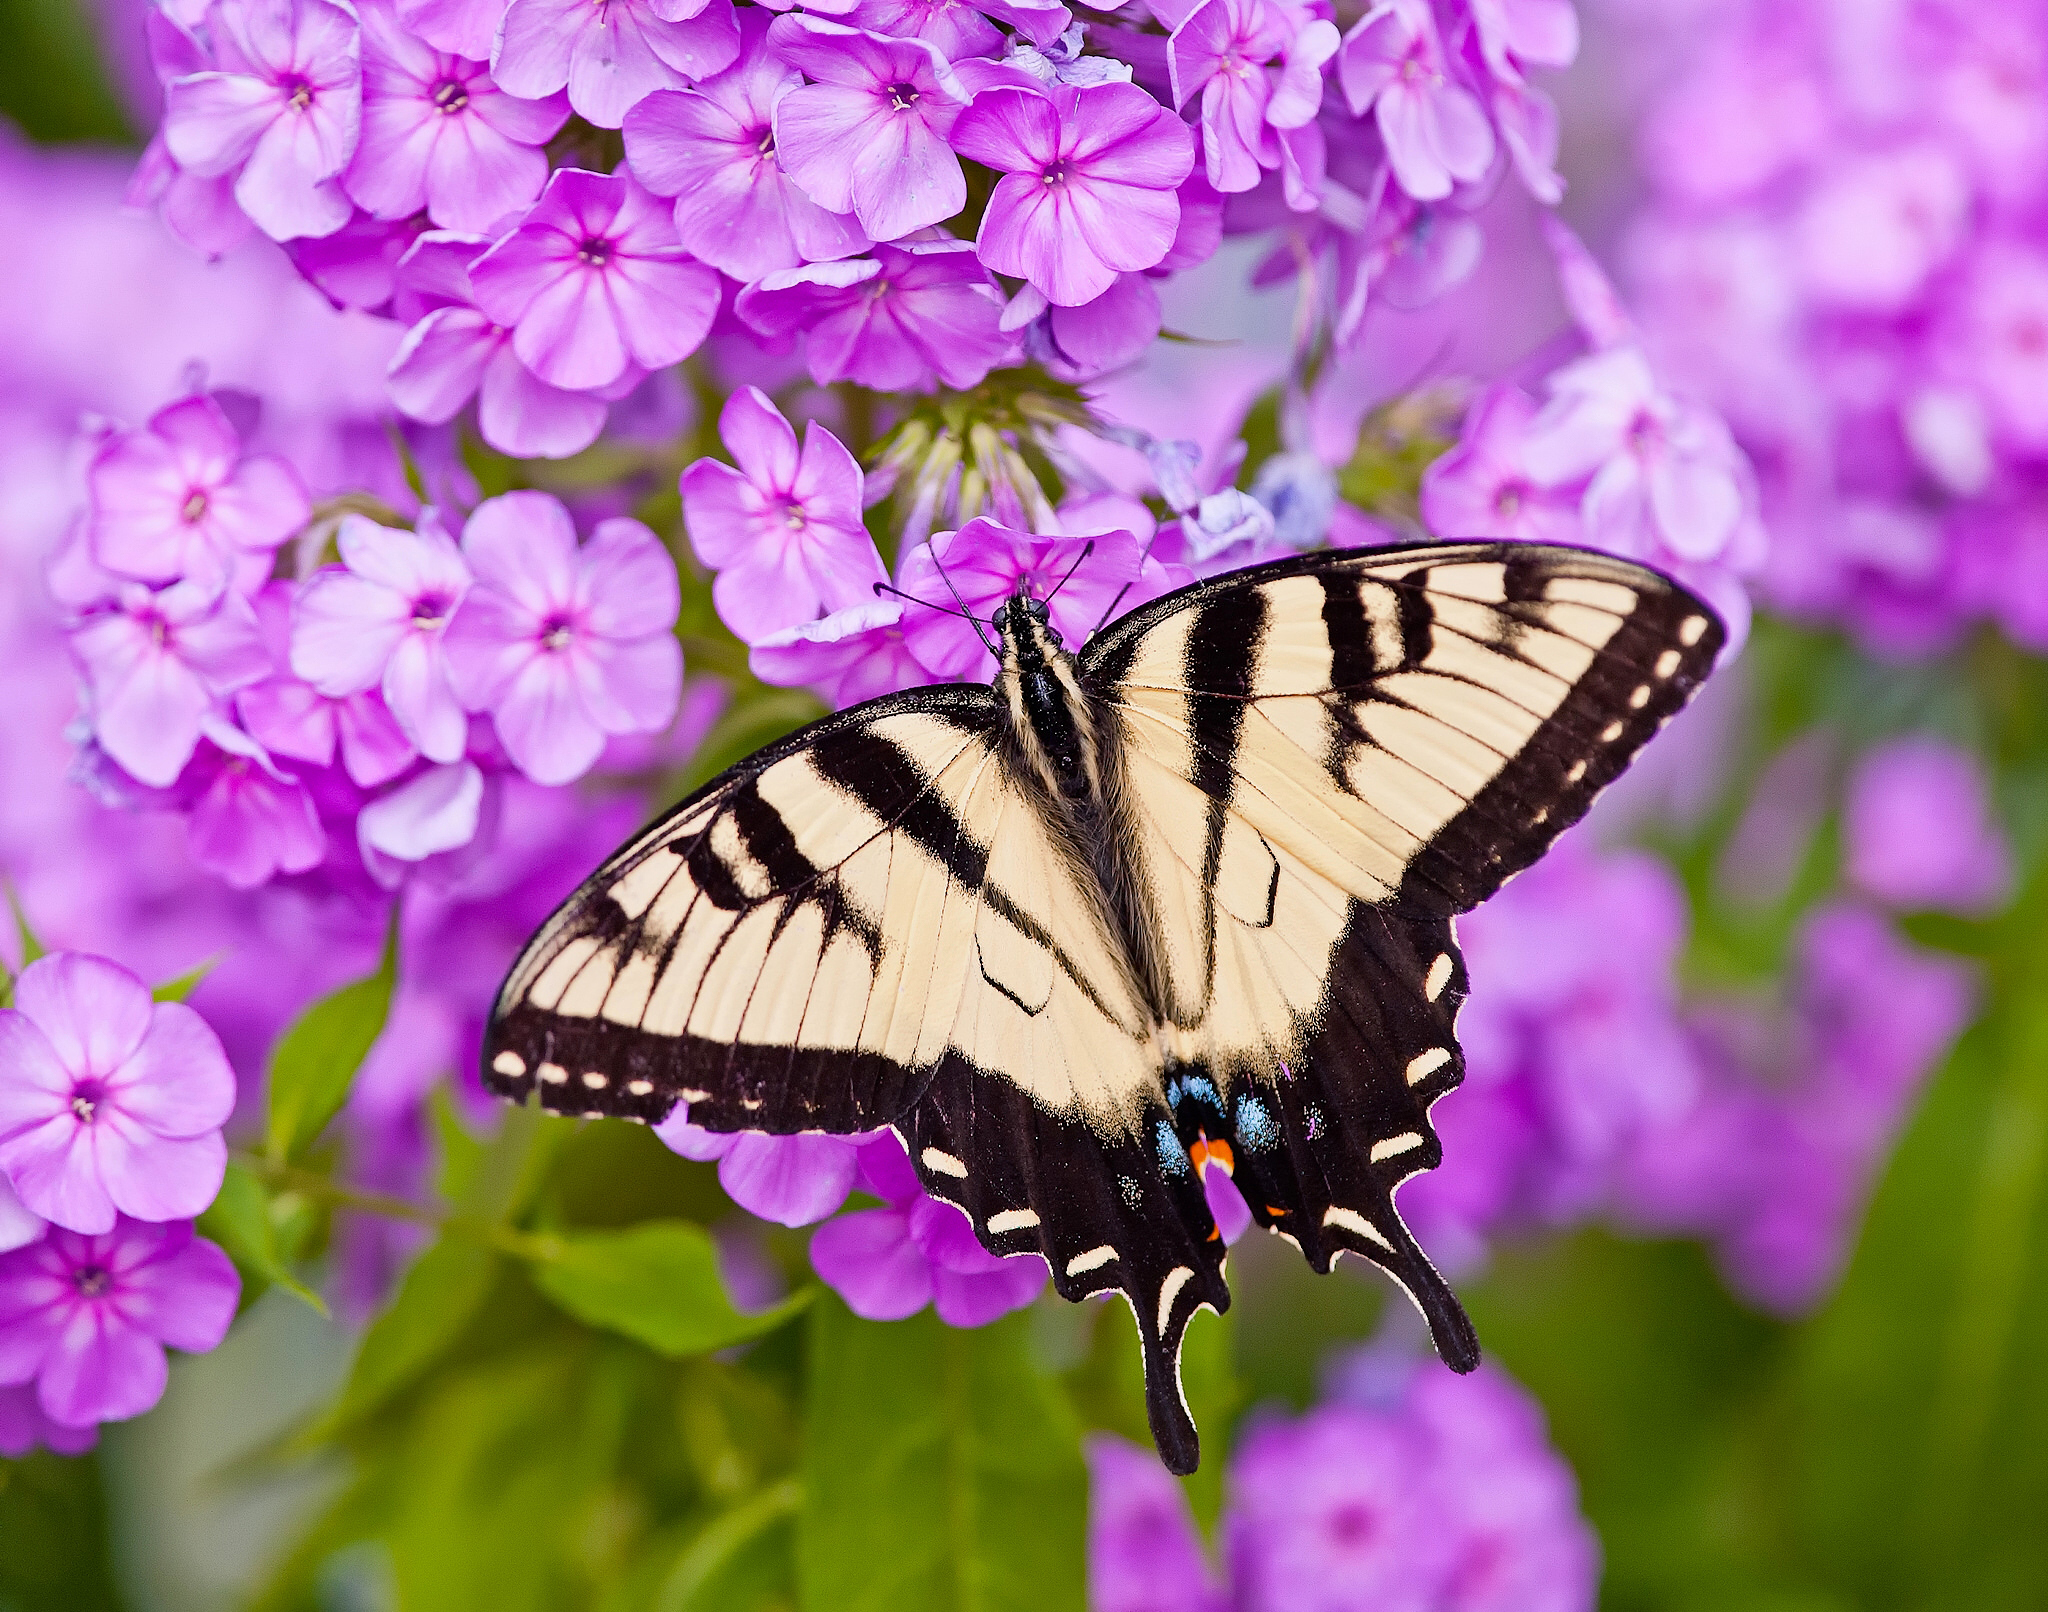 PC Wallpapers animal, butterfly, close up, flower, phlox, pink flower